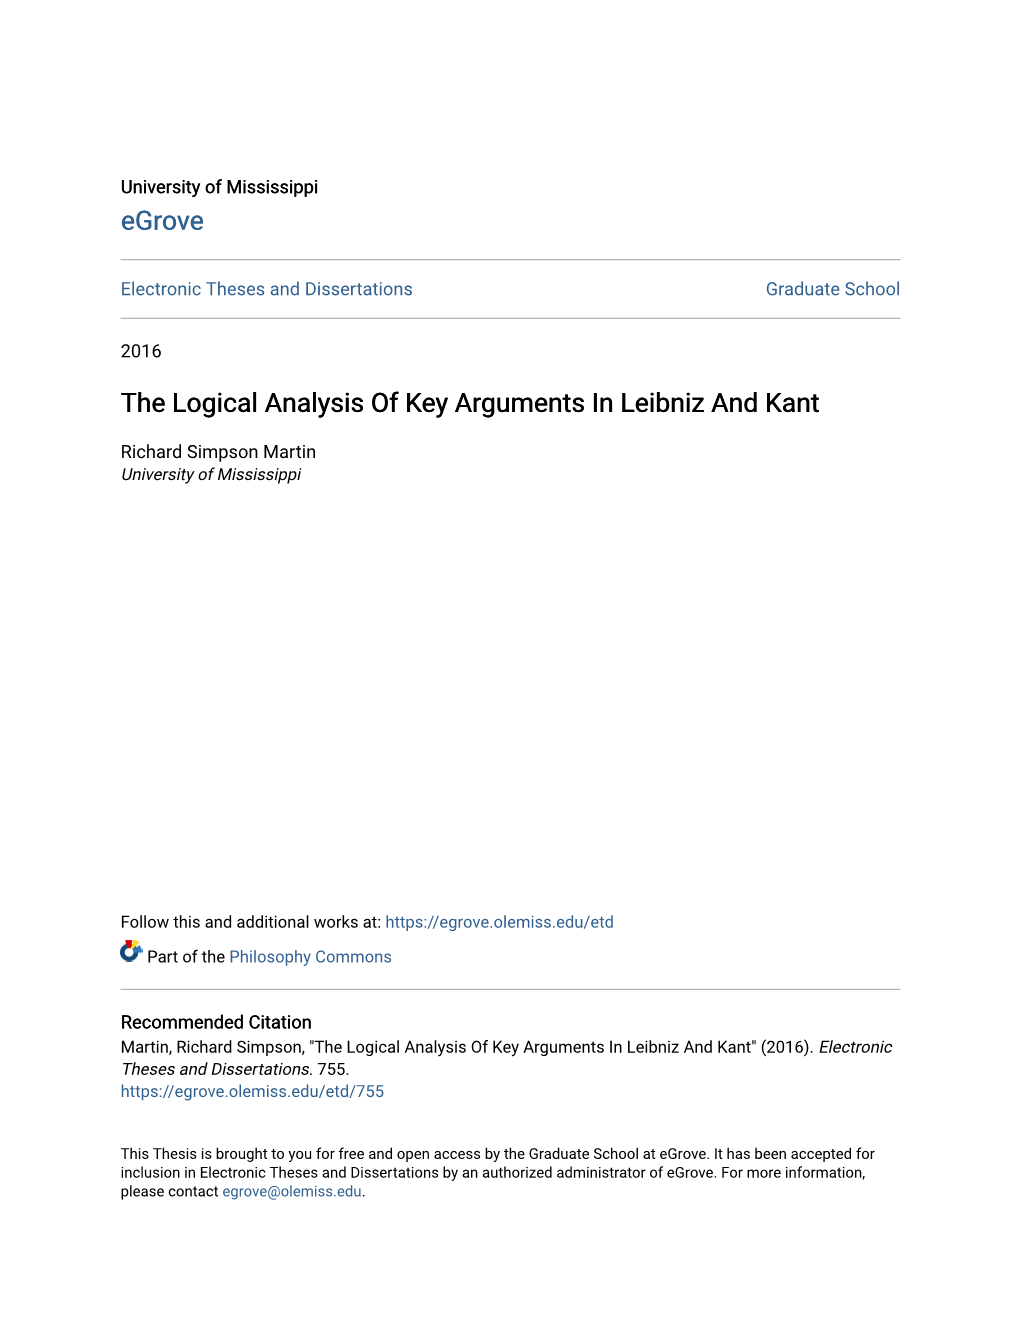 The Logical Analysis of Key Arguments in Leibniz and Kant